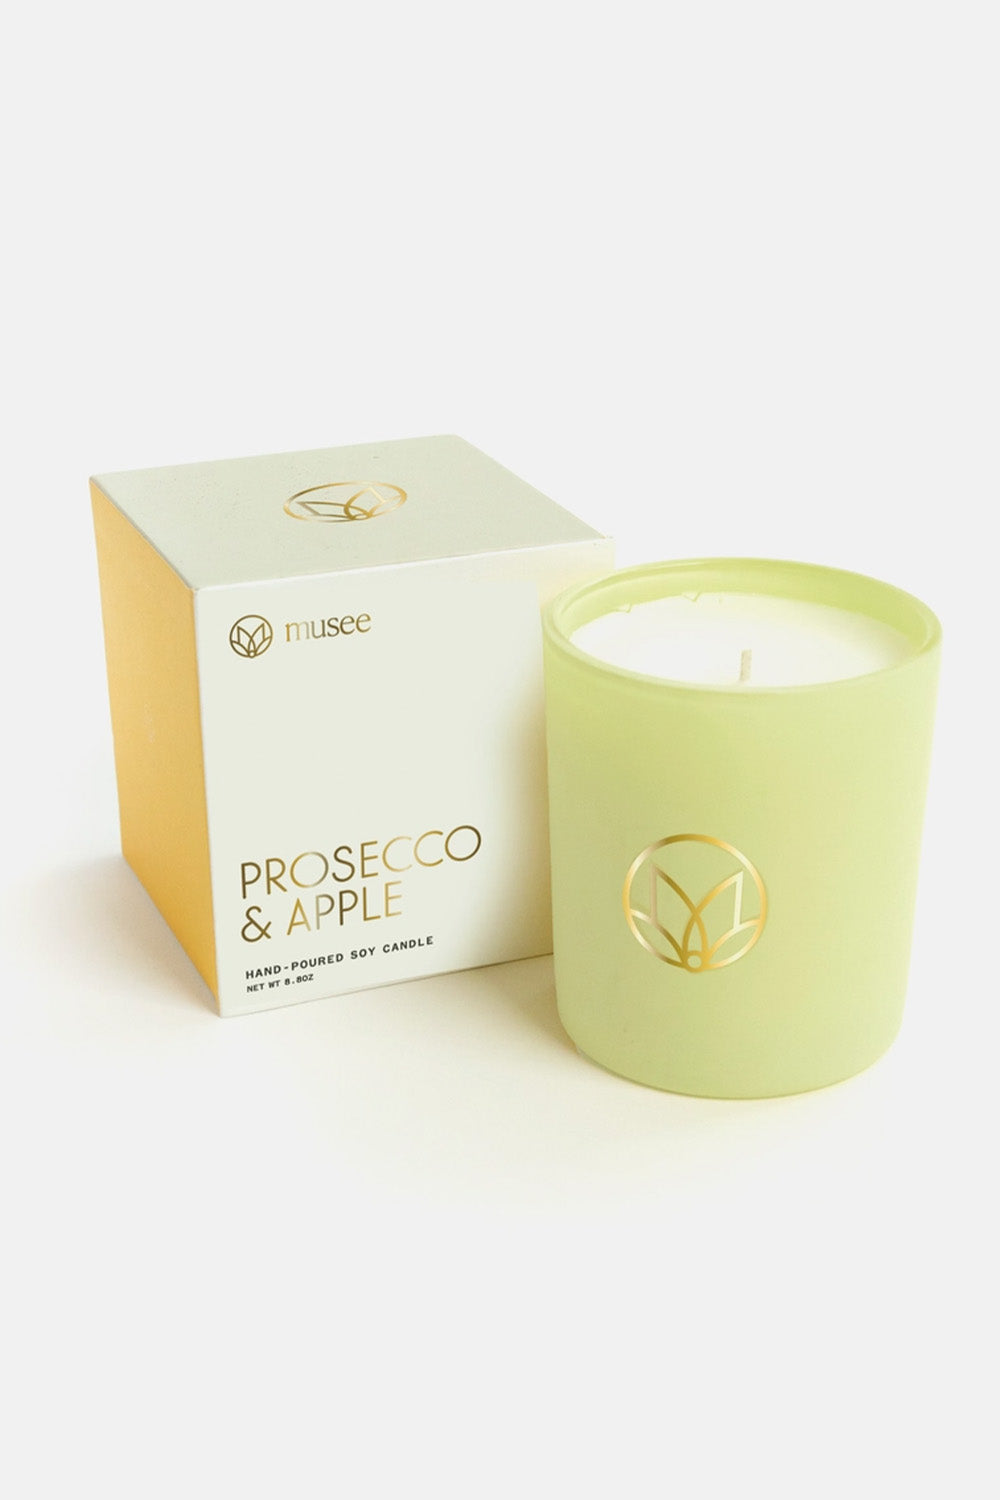 Prosecco & Apple Soy Candle